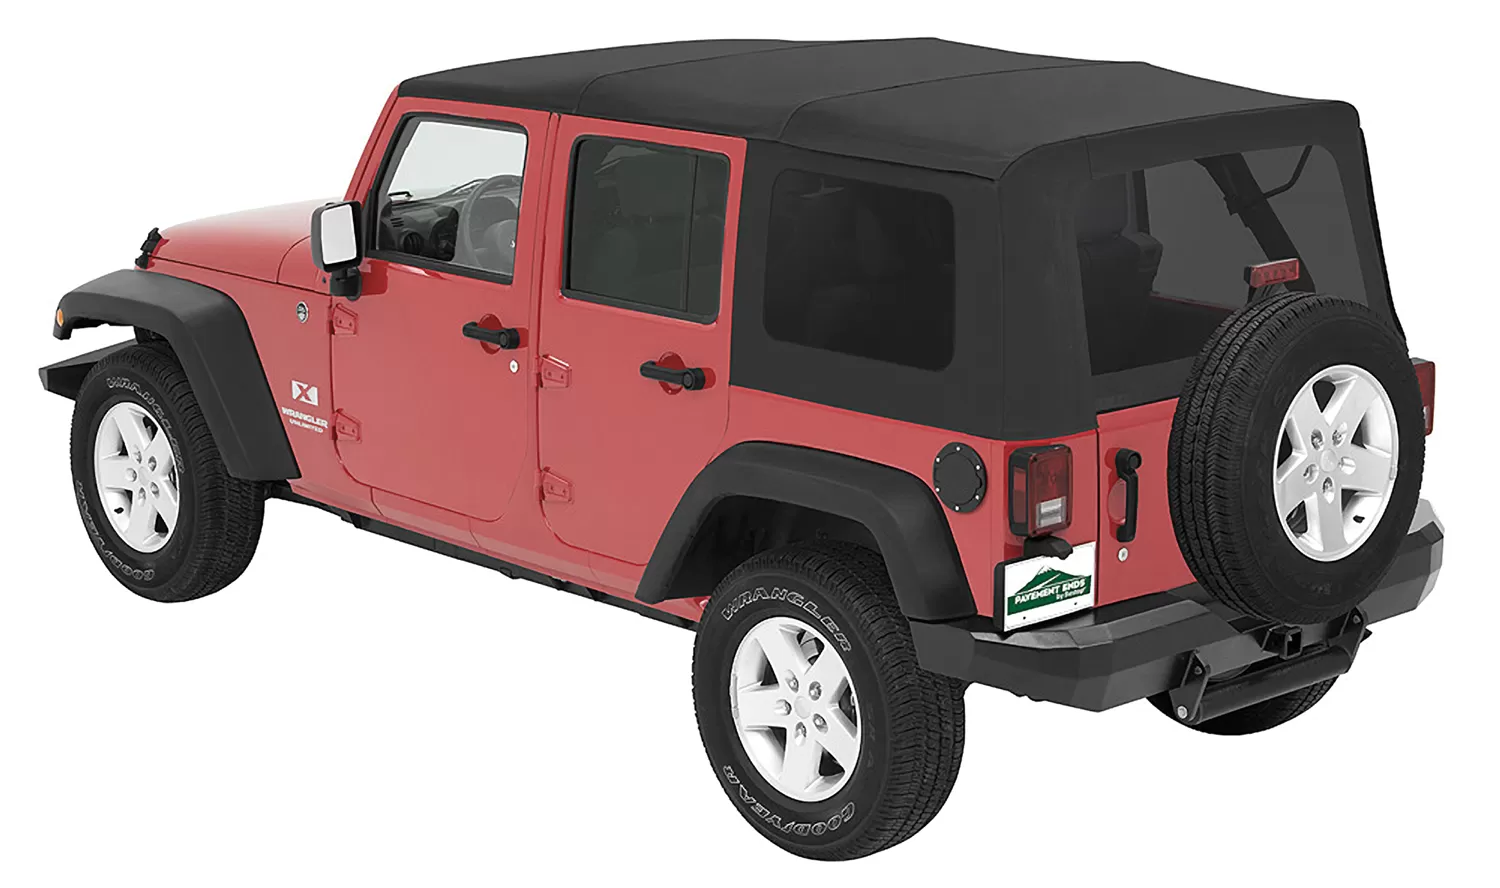 Pavement Ends By Bestop Black Diamond Replay OEM Replacement Soft Top Tinted Windows Jeep Wrangler 4-Door 2007-2009 - 51201-35